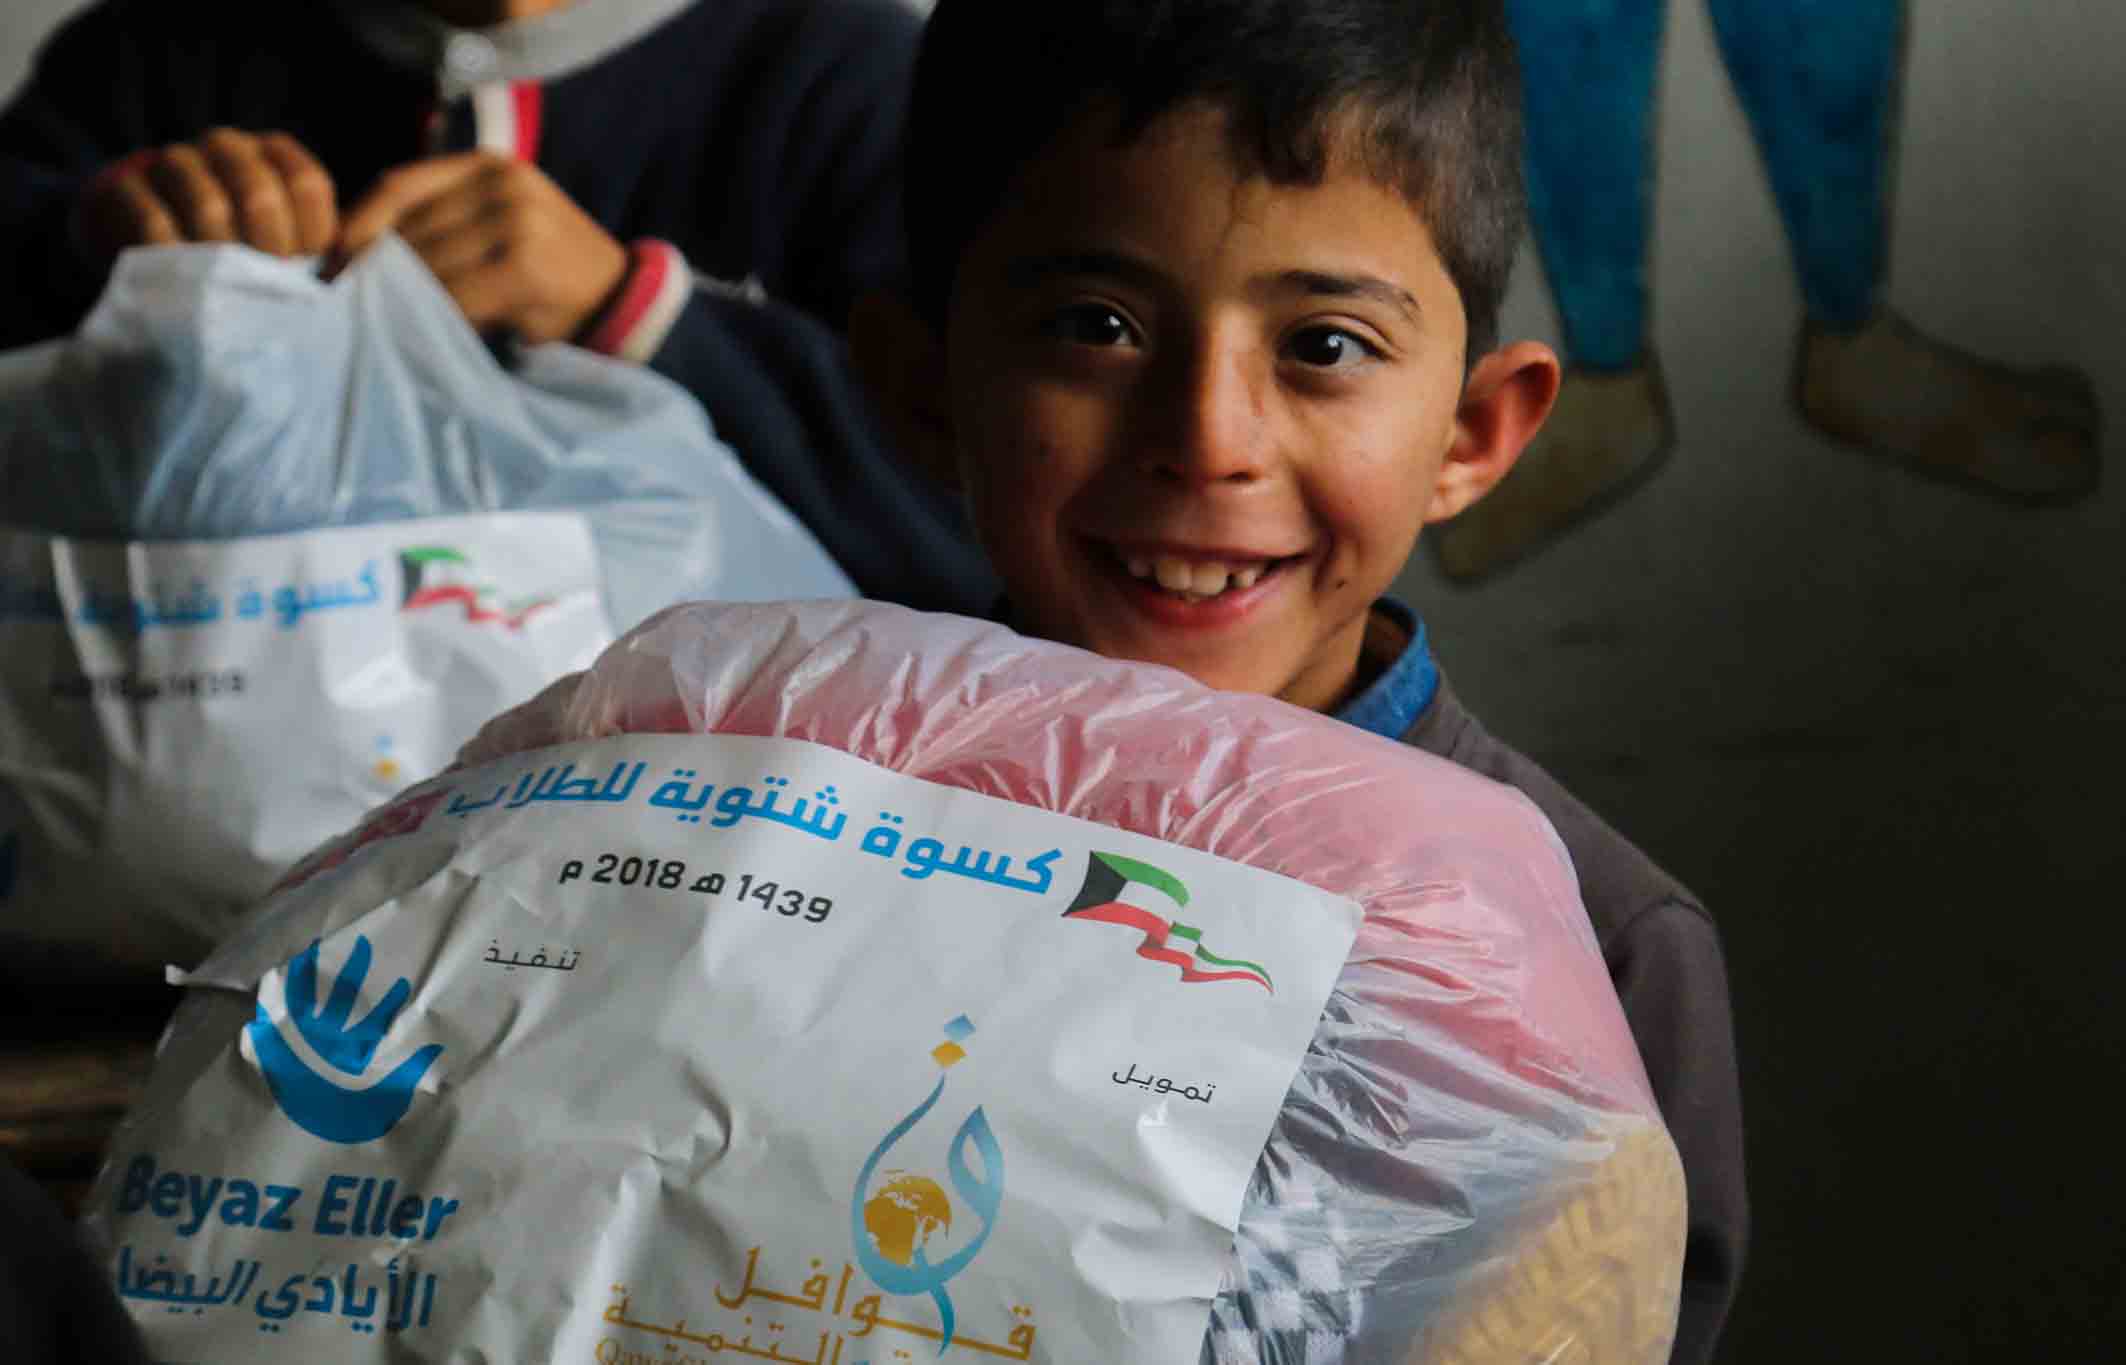 Clothing for the needy children As means to meet winter needs of poor students, “Beyaz Eller” has purchased and distributed clothing sets consisting of a rain jacket, rain boots, scarves, caps, gloves, and socks. The project was implemented in Idlib suburbs and northern Homs countryside with a total of 525 benefiters.